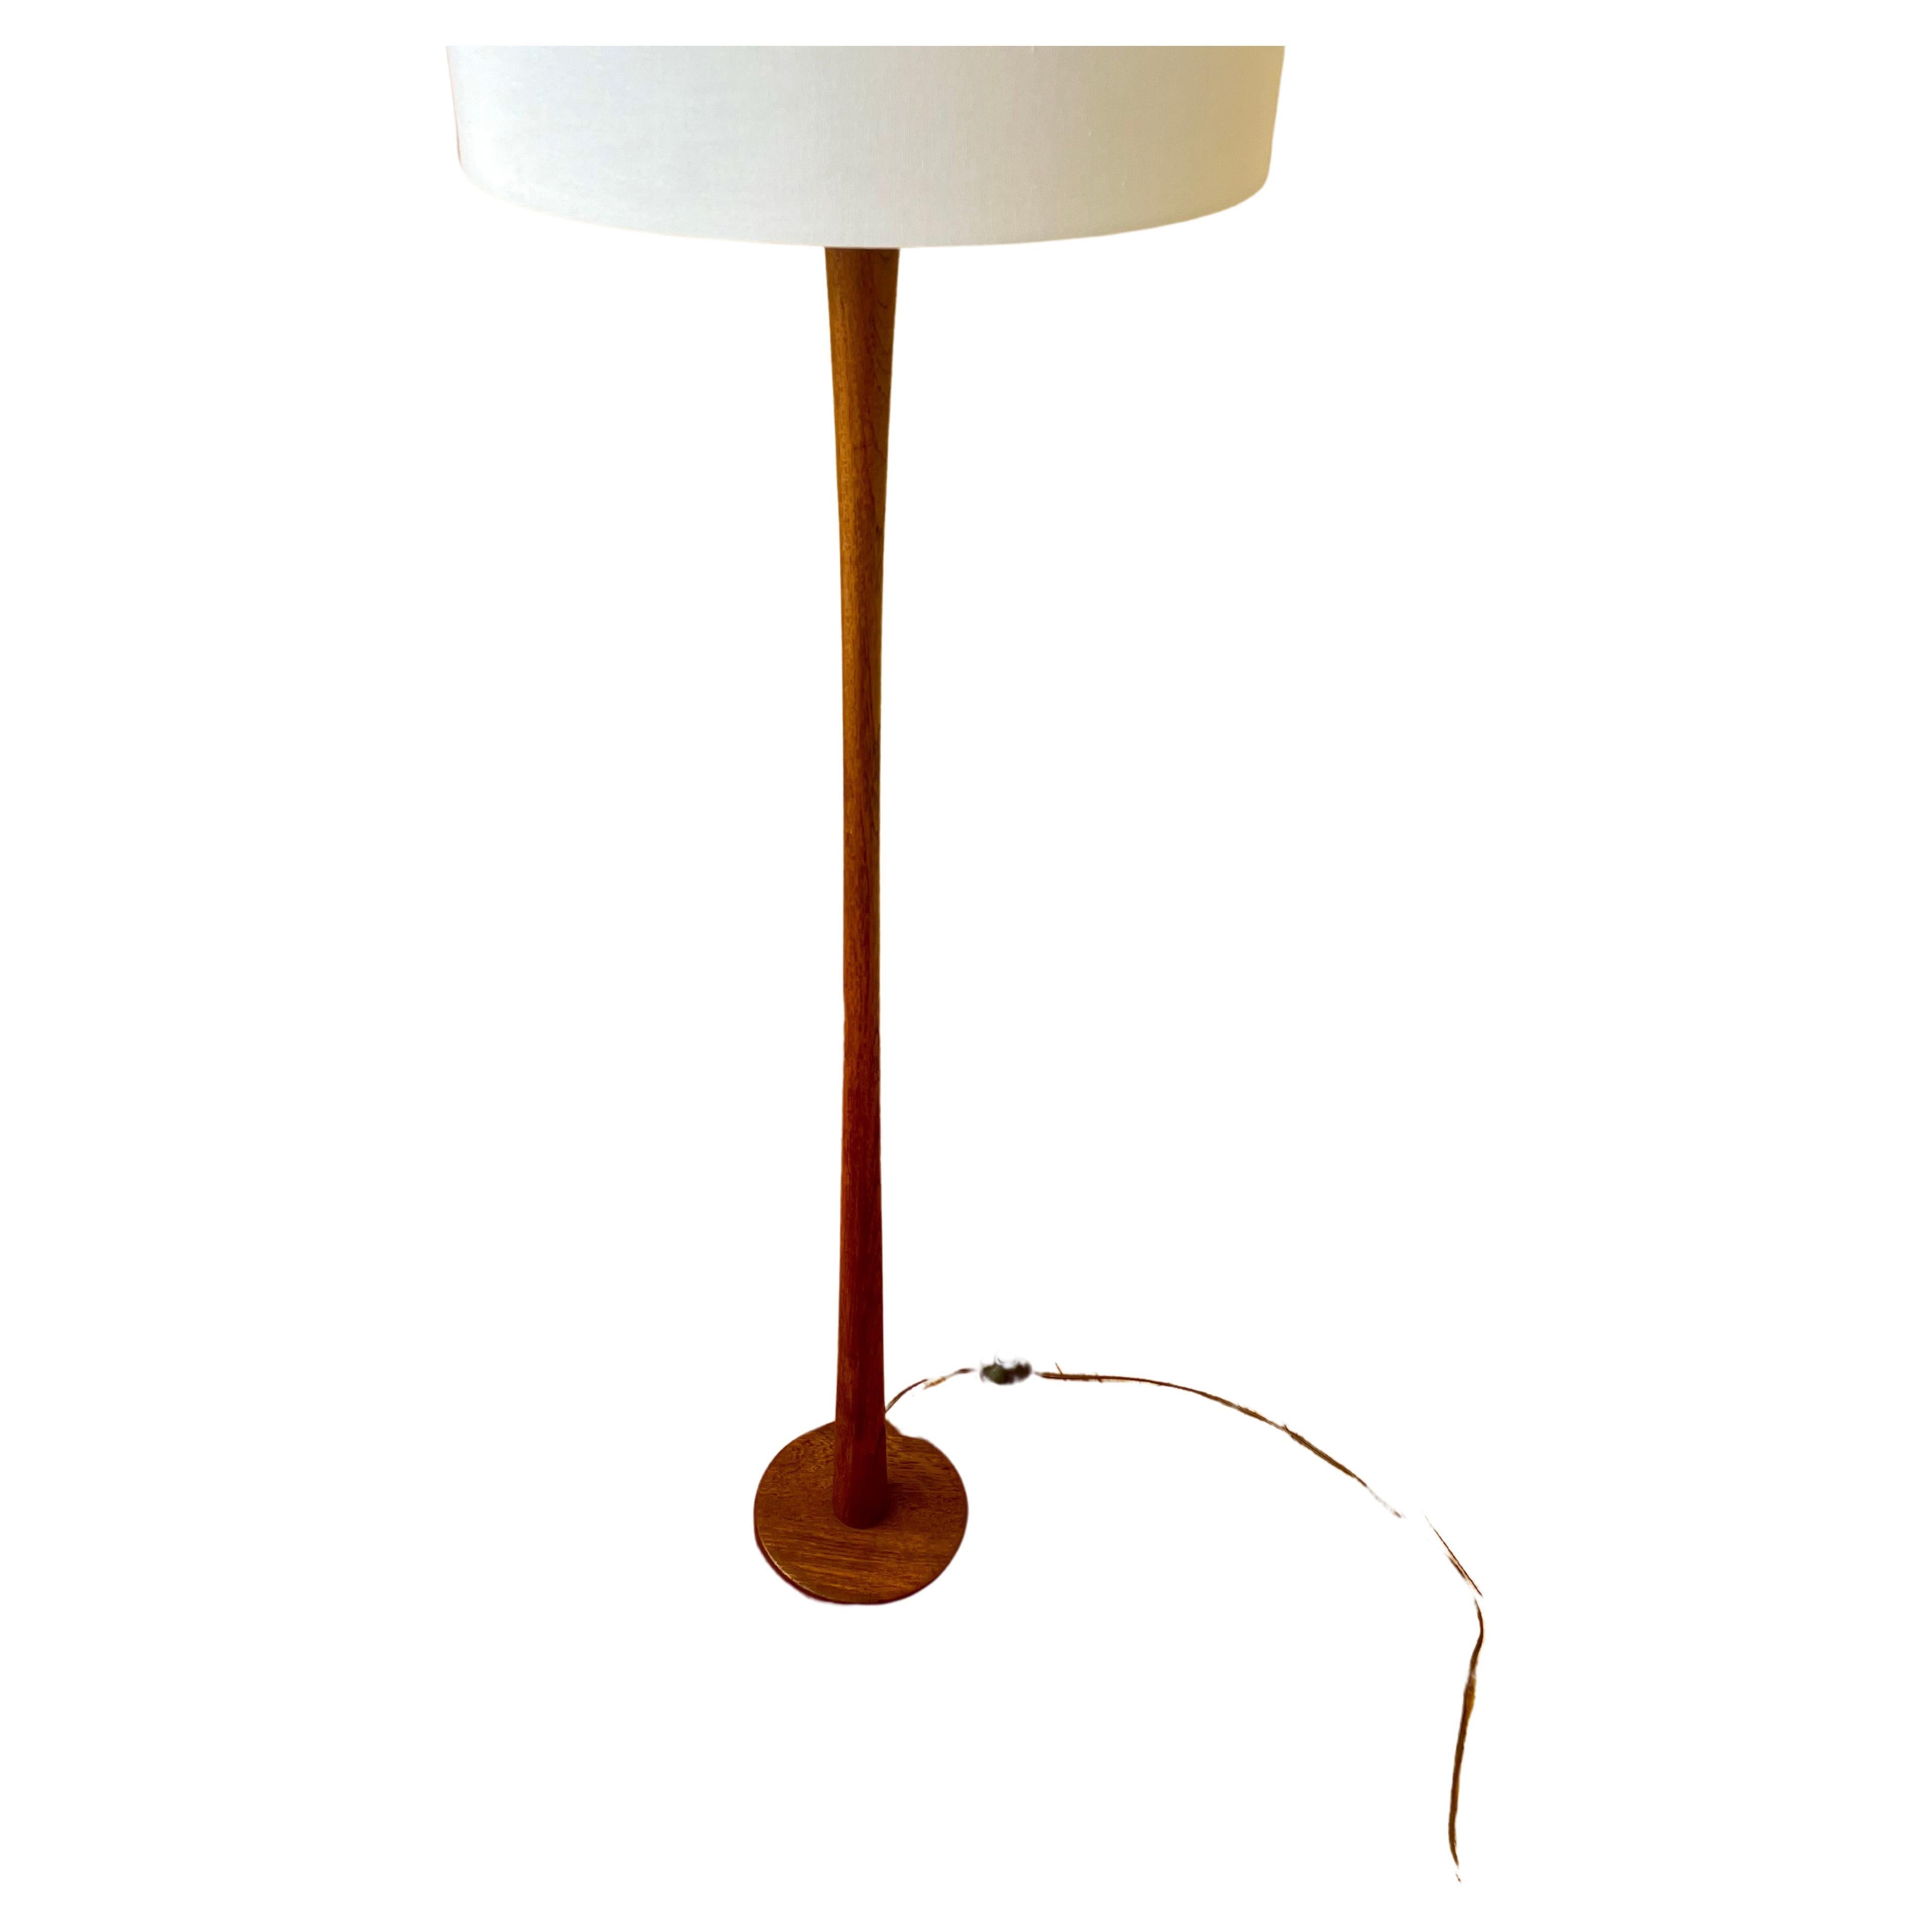 Simple elegant solid teak floor lamp, freshly refinished and rewired, lamp shade it’s not included , 60